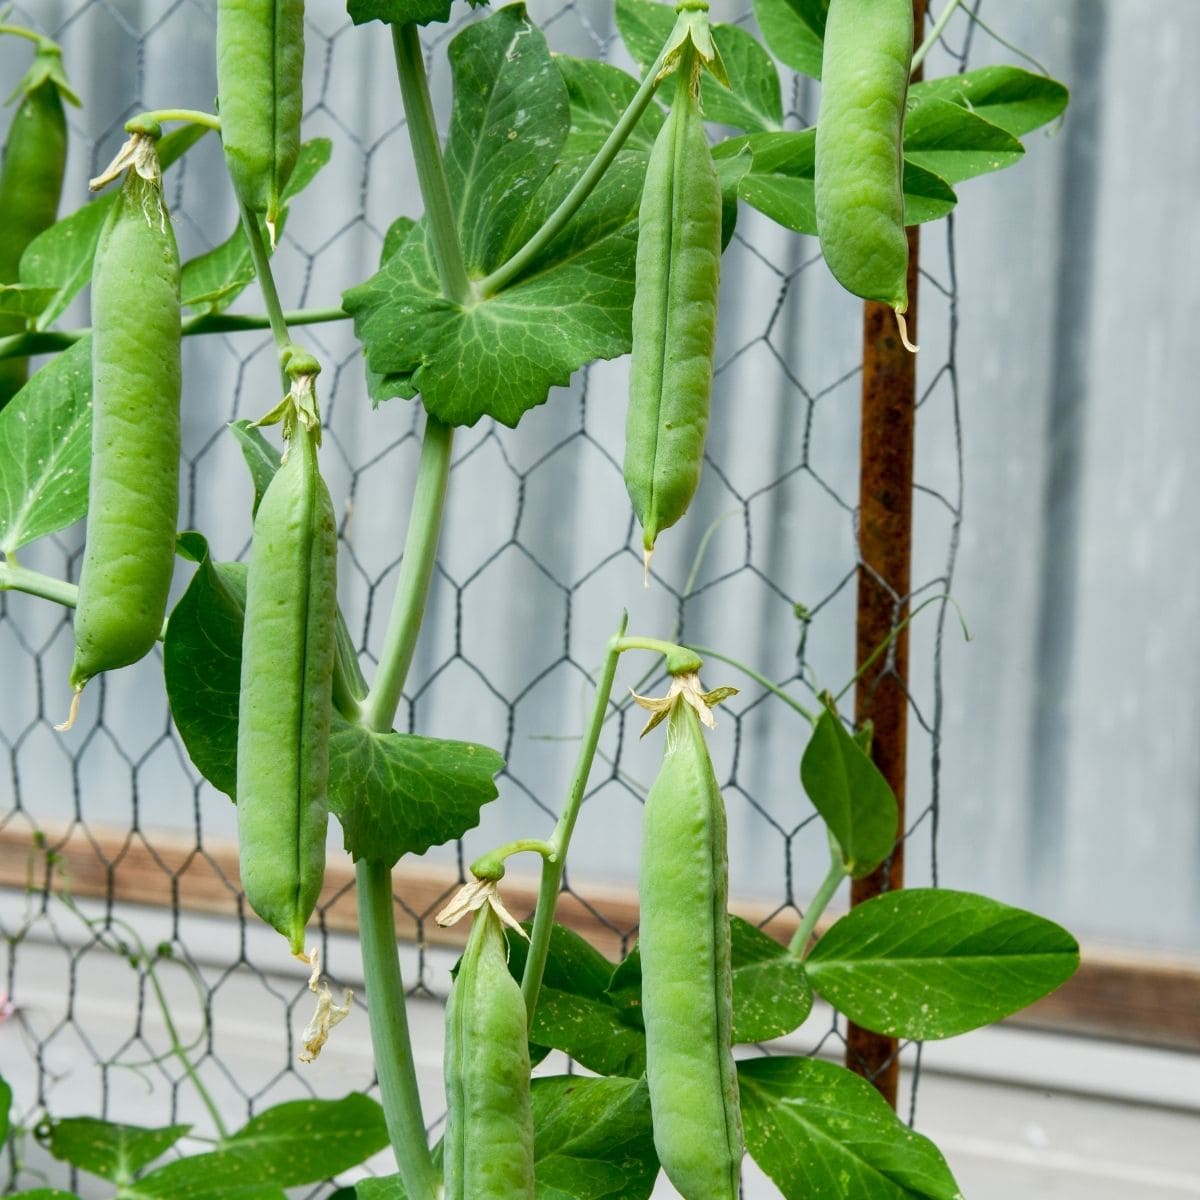 Snap peas growing on a chicken wire trellis.